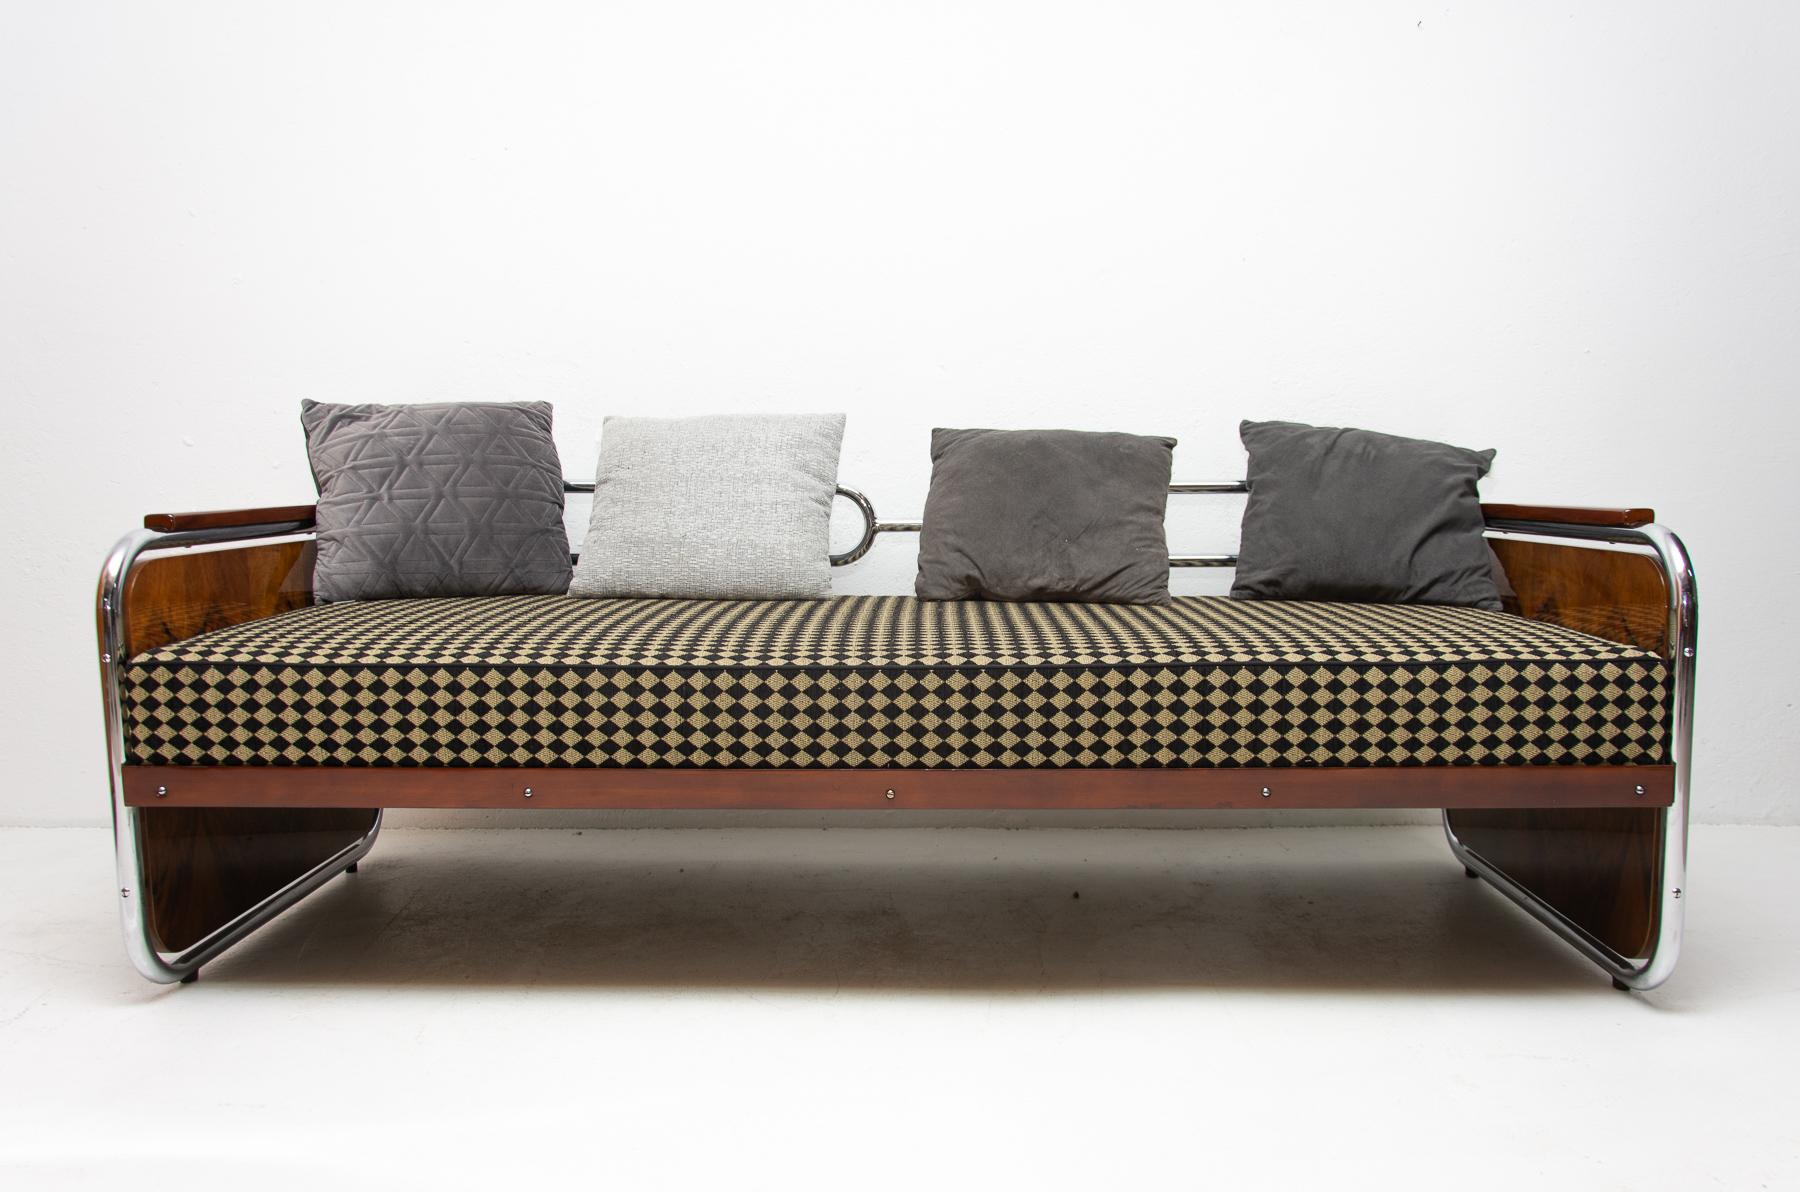 Chromed tubular steel sofa from the Bauhaus period, 1930s, Bohemia. Probably made by Hynek Gottwald company. The sofa was fully restored including new upholstery, wooden side parts were refurbished to high gloss. It´s beautiful example of European